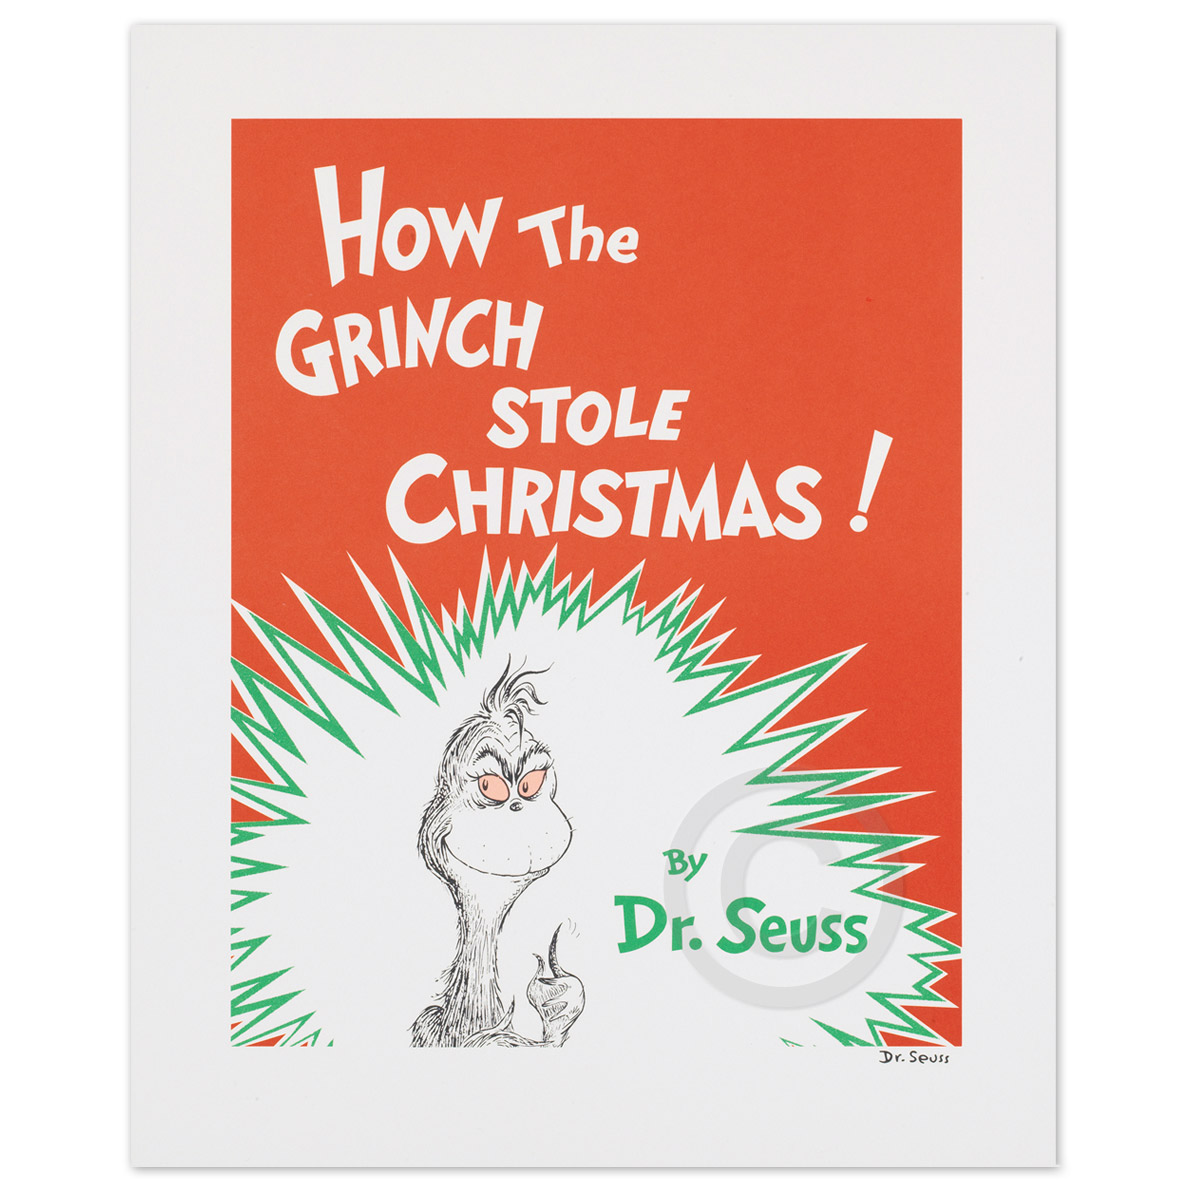 How the Grinch Stole Christmas - Book Cover by Dr. Seuss